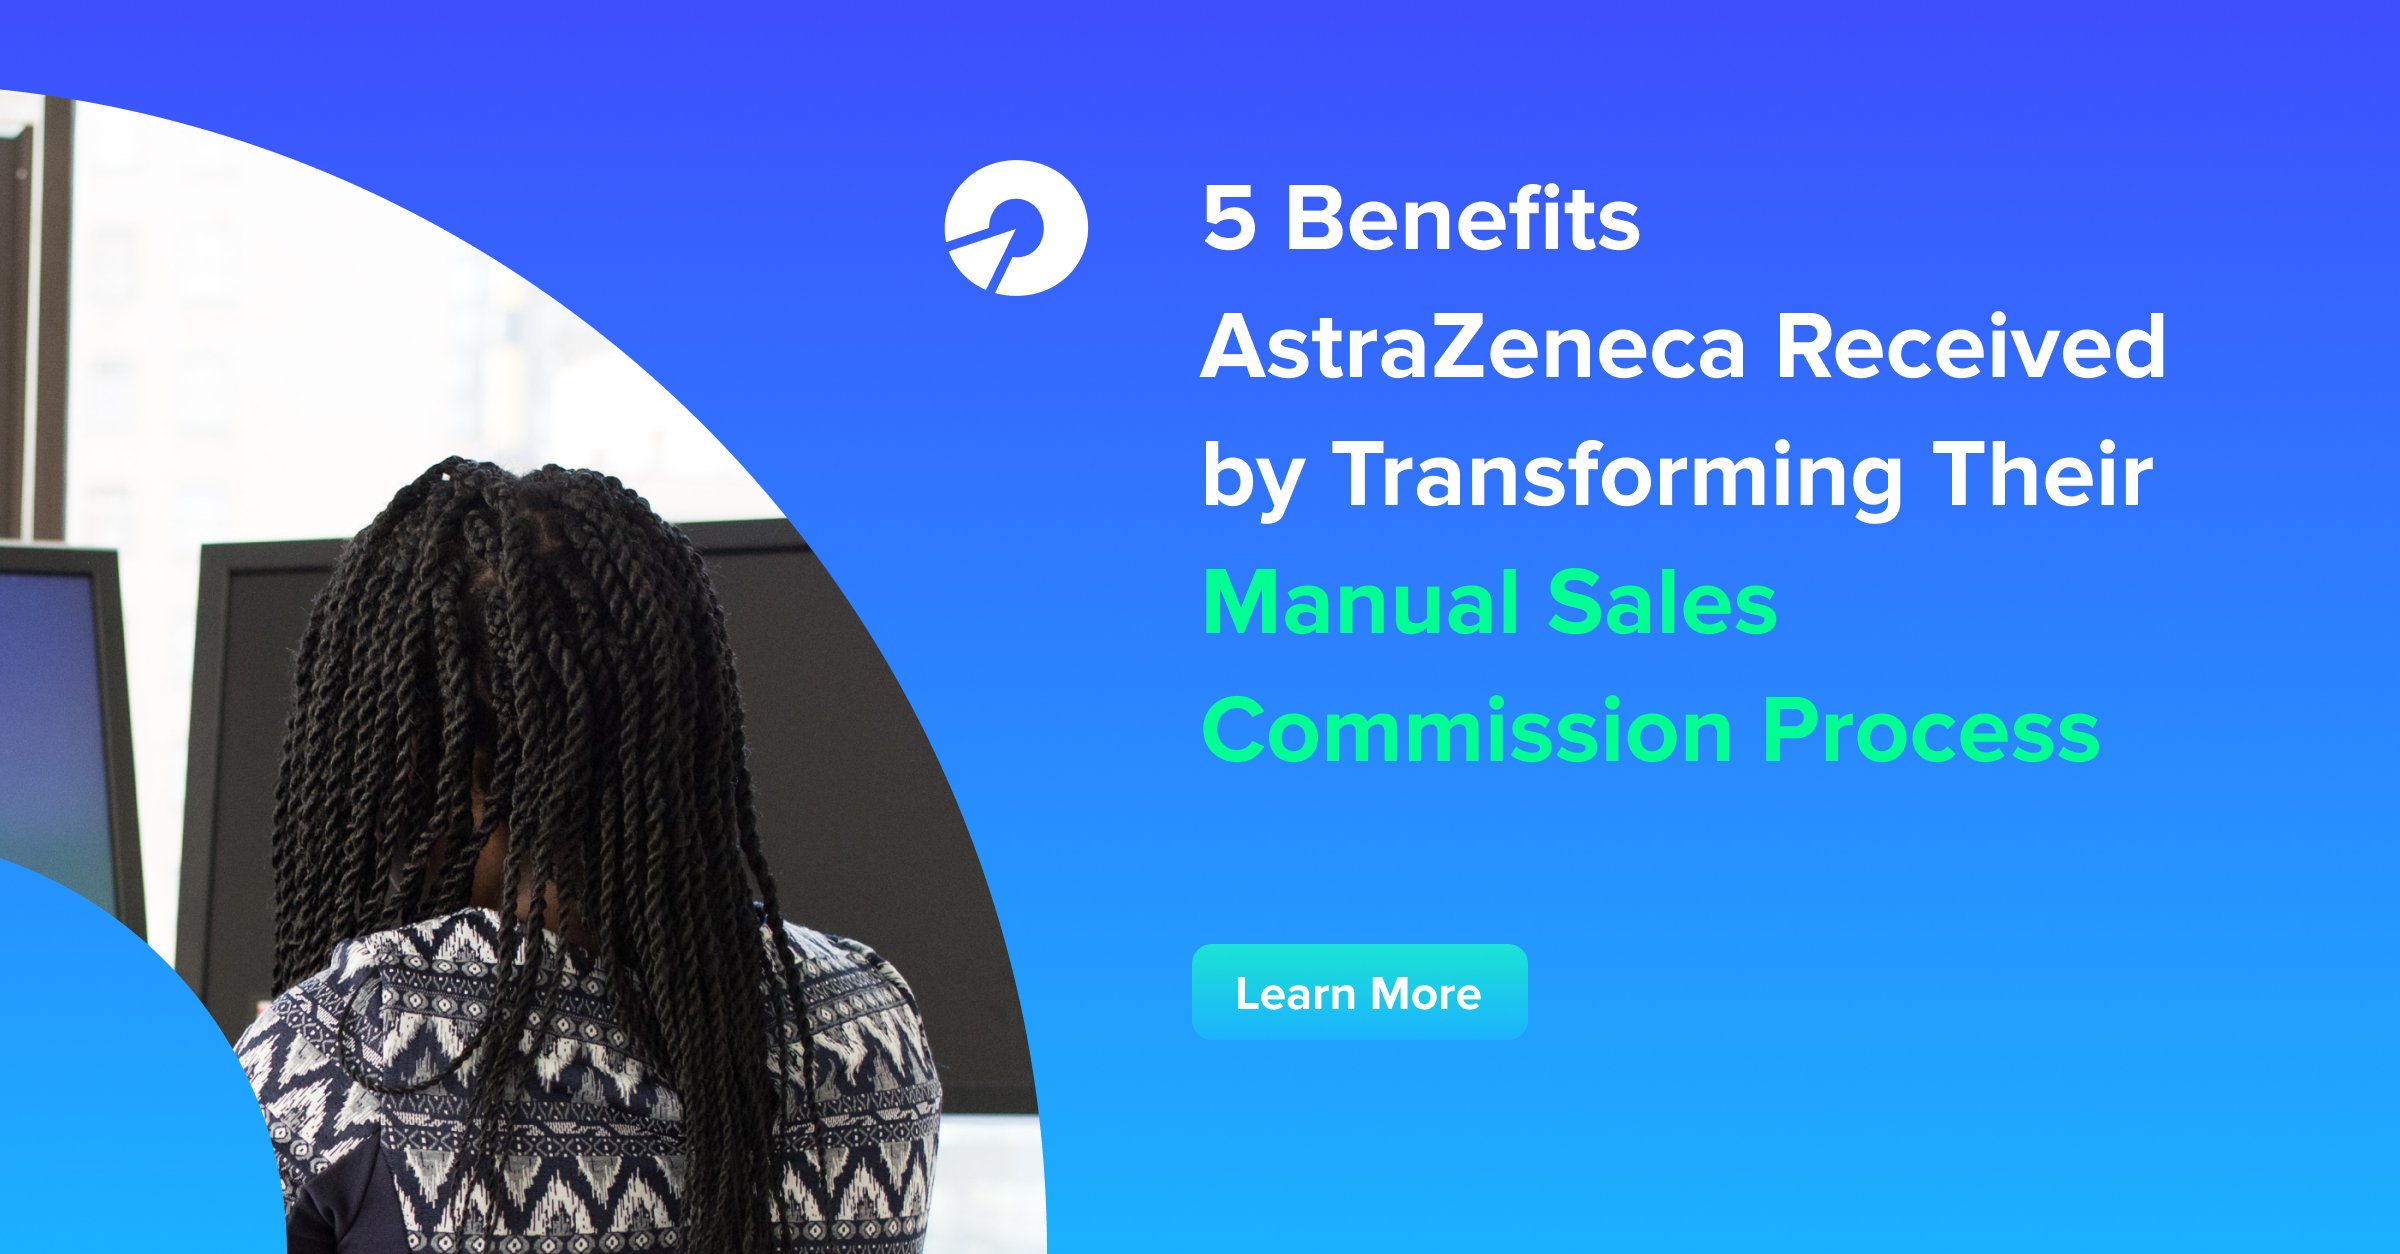 5 Benefits AstraZeneca Received by Transforming Their Manual Sales Commission Process